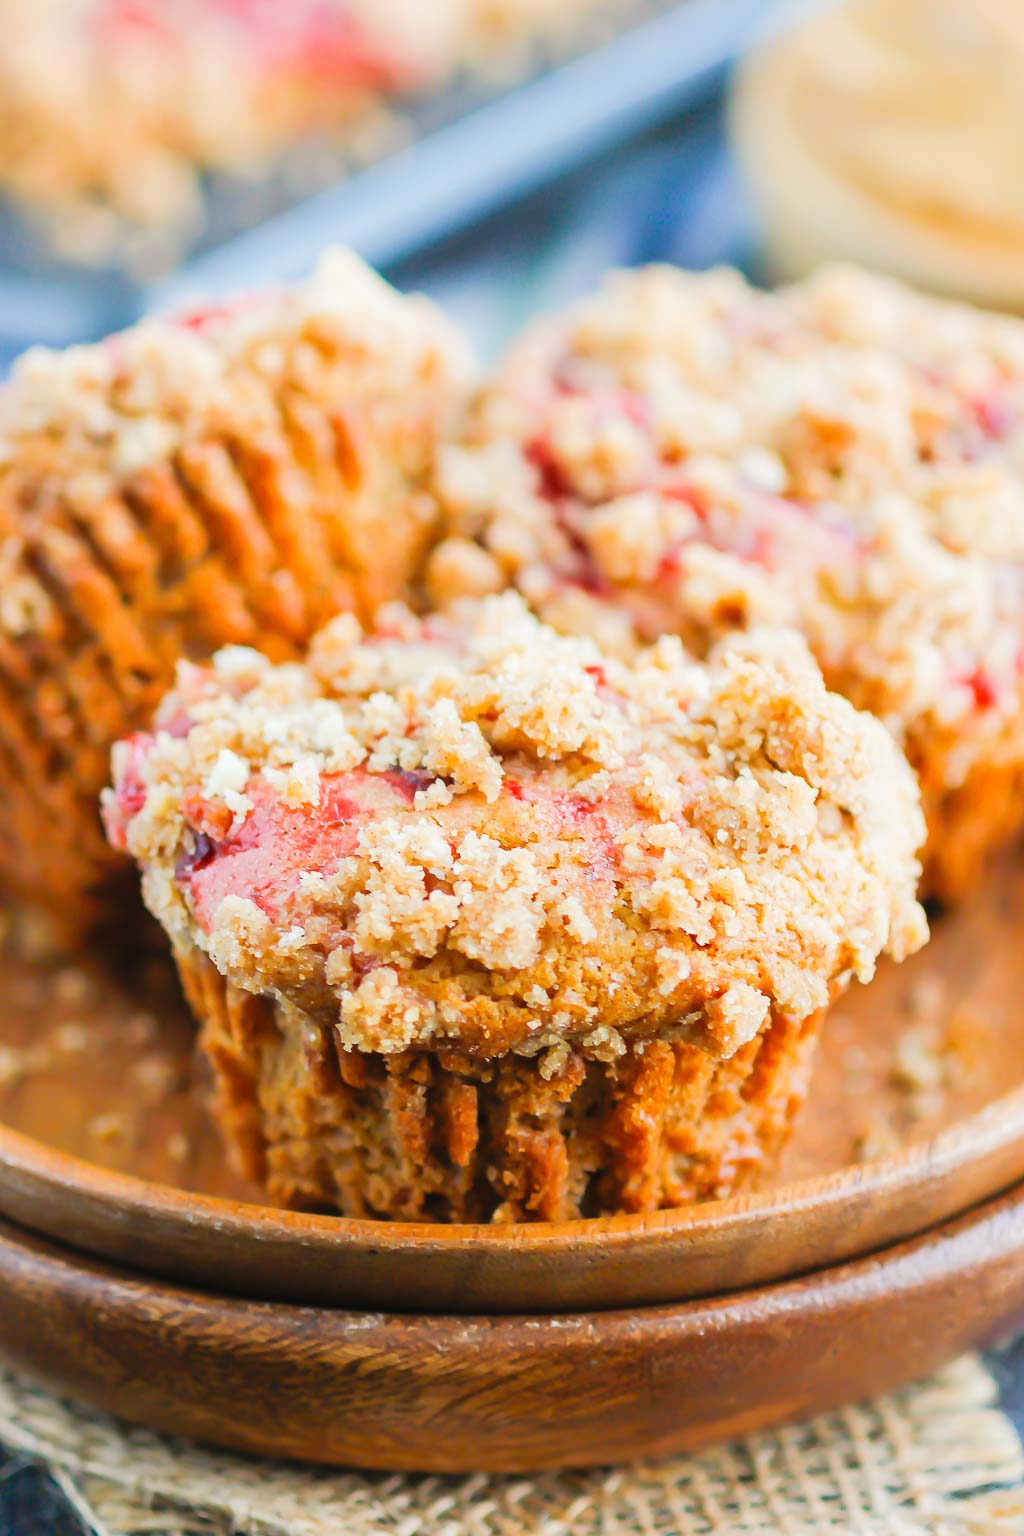 Peanut Butter and Jelly Muffins are the perfect breakfast, snack, or even dessert. A sweet peanut butter muffin is swirled with strawberry jelly and then sprinkled with the most delicious crumb topping. These tasty muffins are kid-friendly and perfect for just about any time! #peanutbuttermuffins #peanutbutterjellymuffins #peanutbutterandjelly #peanutbutterrecipe #snackideas #backtoschoolrecipe #muffinrecipe #breakfast #dessert #peanutbutterdessert